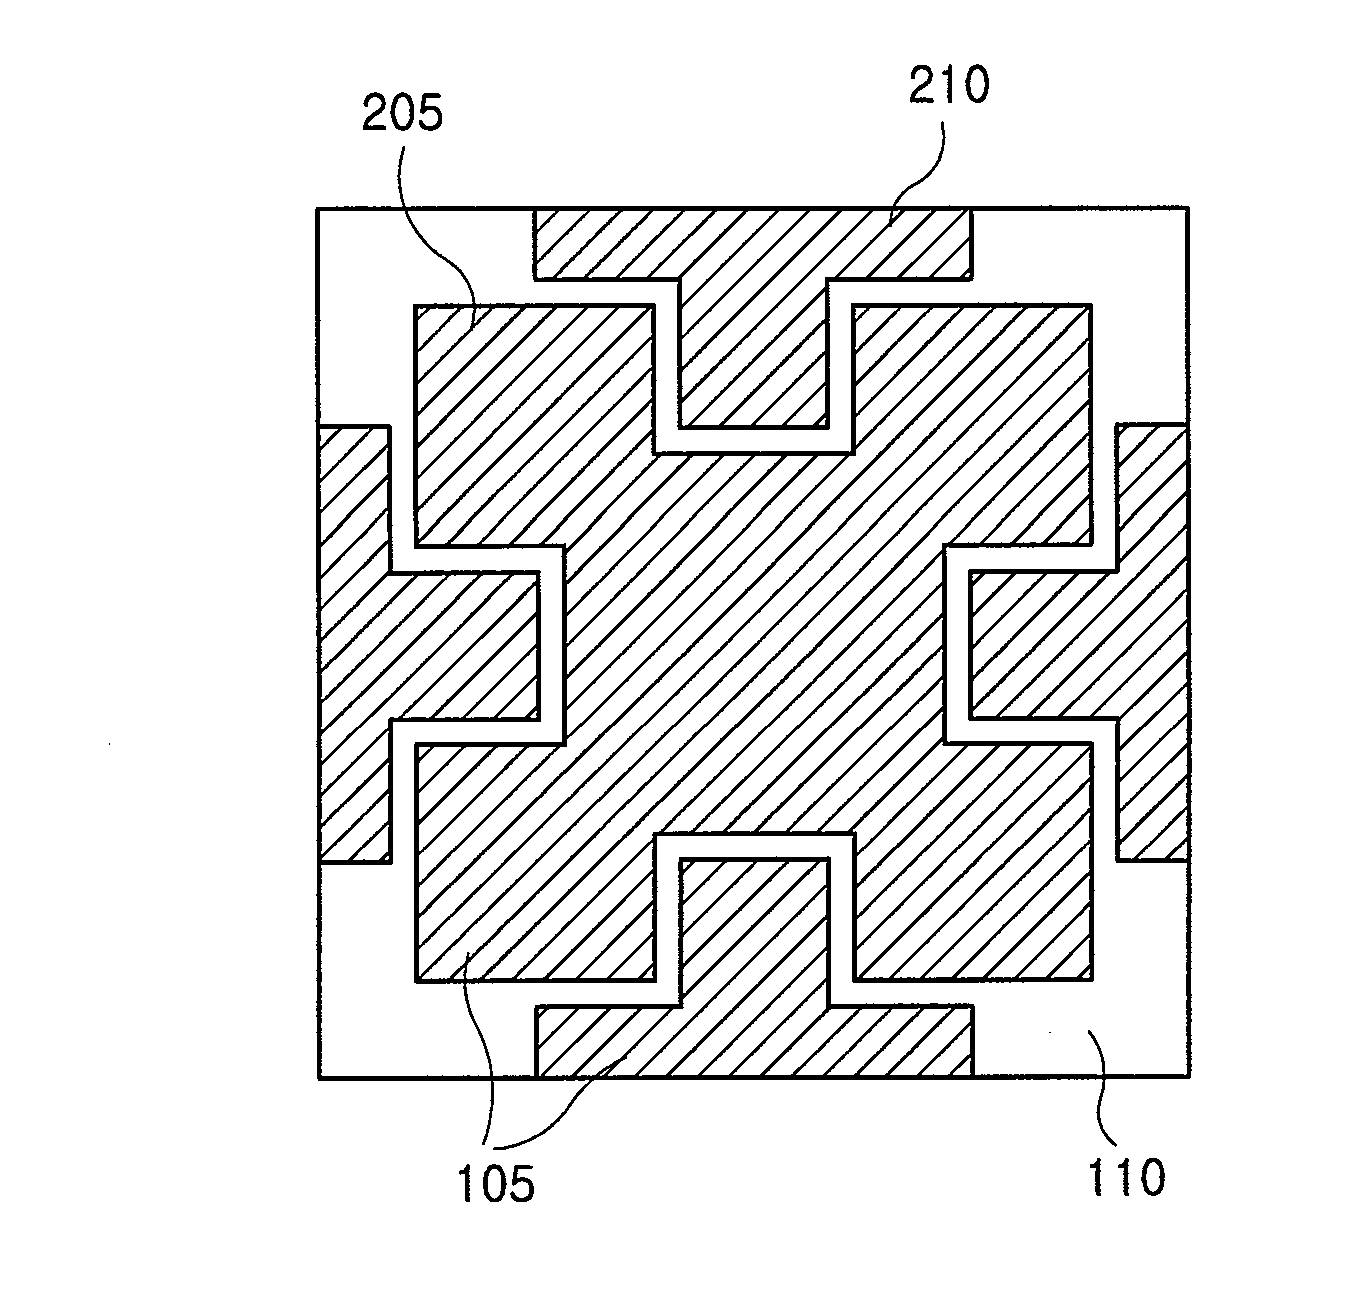 Electromagnetic wave absorber using resistive material